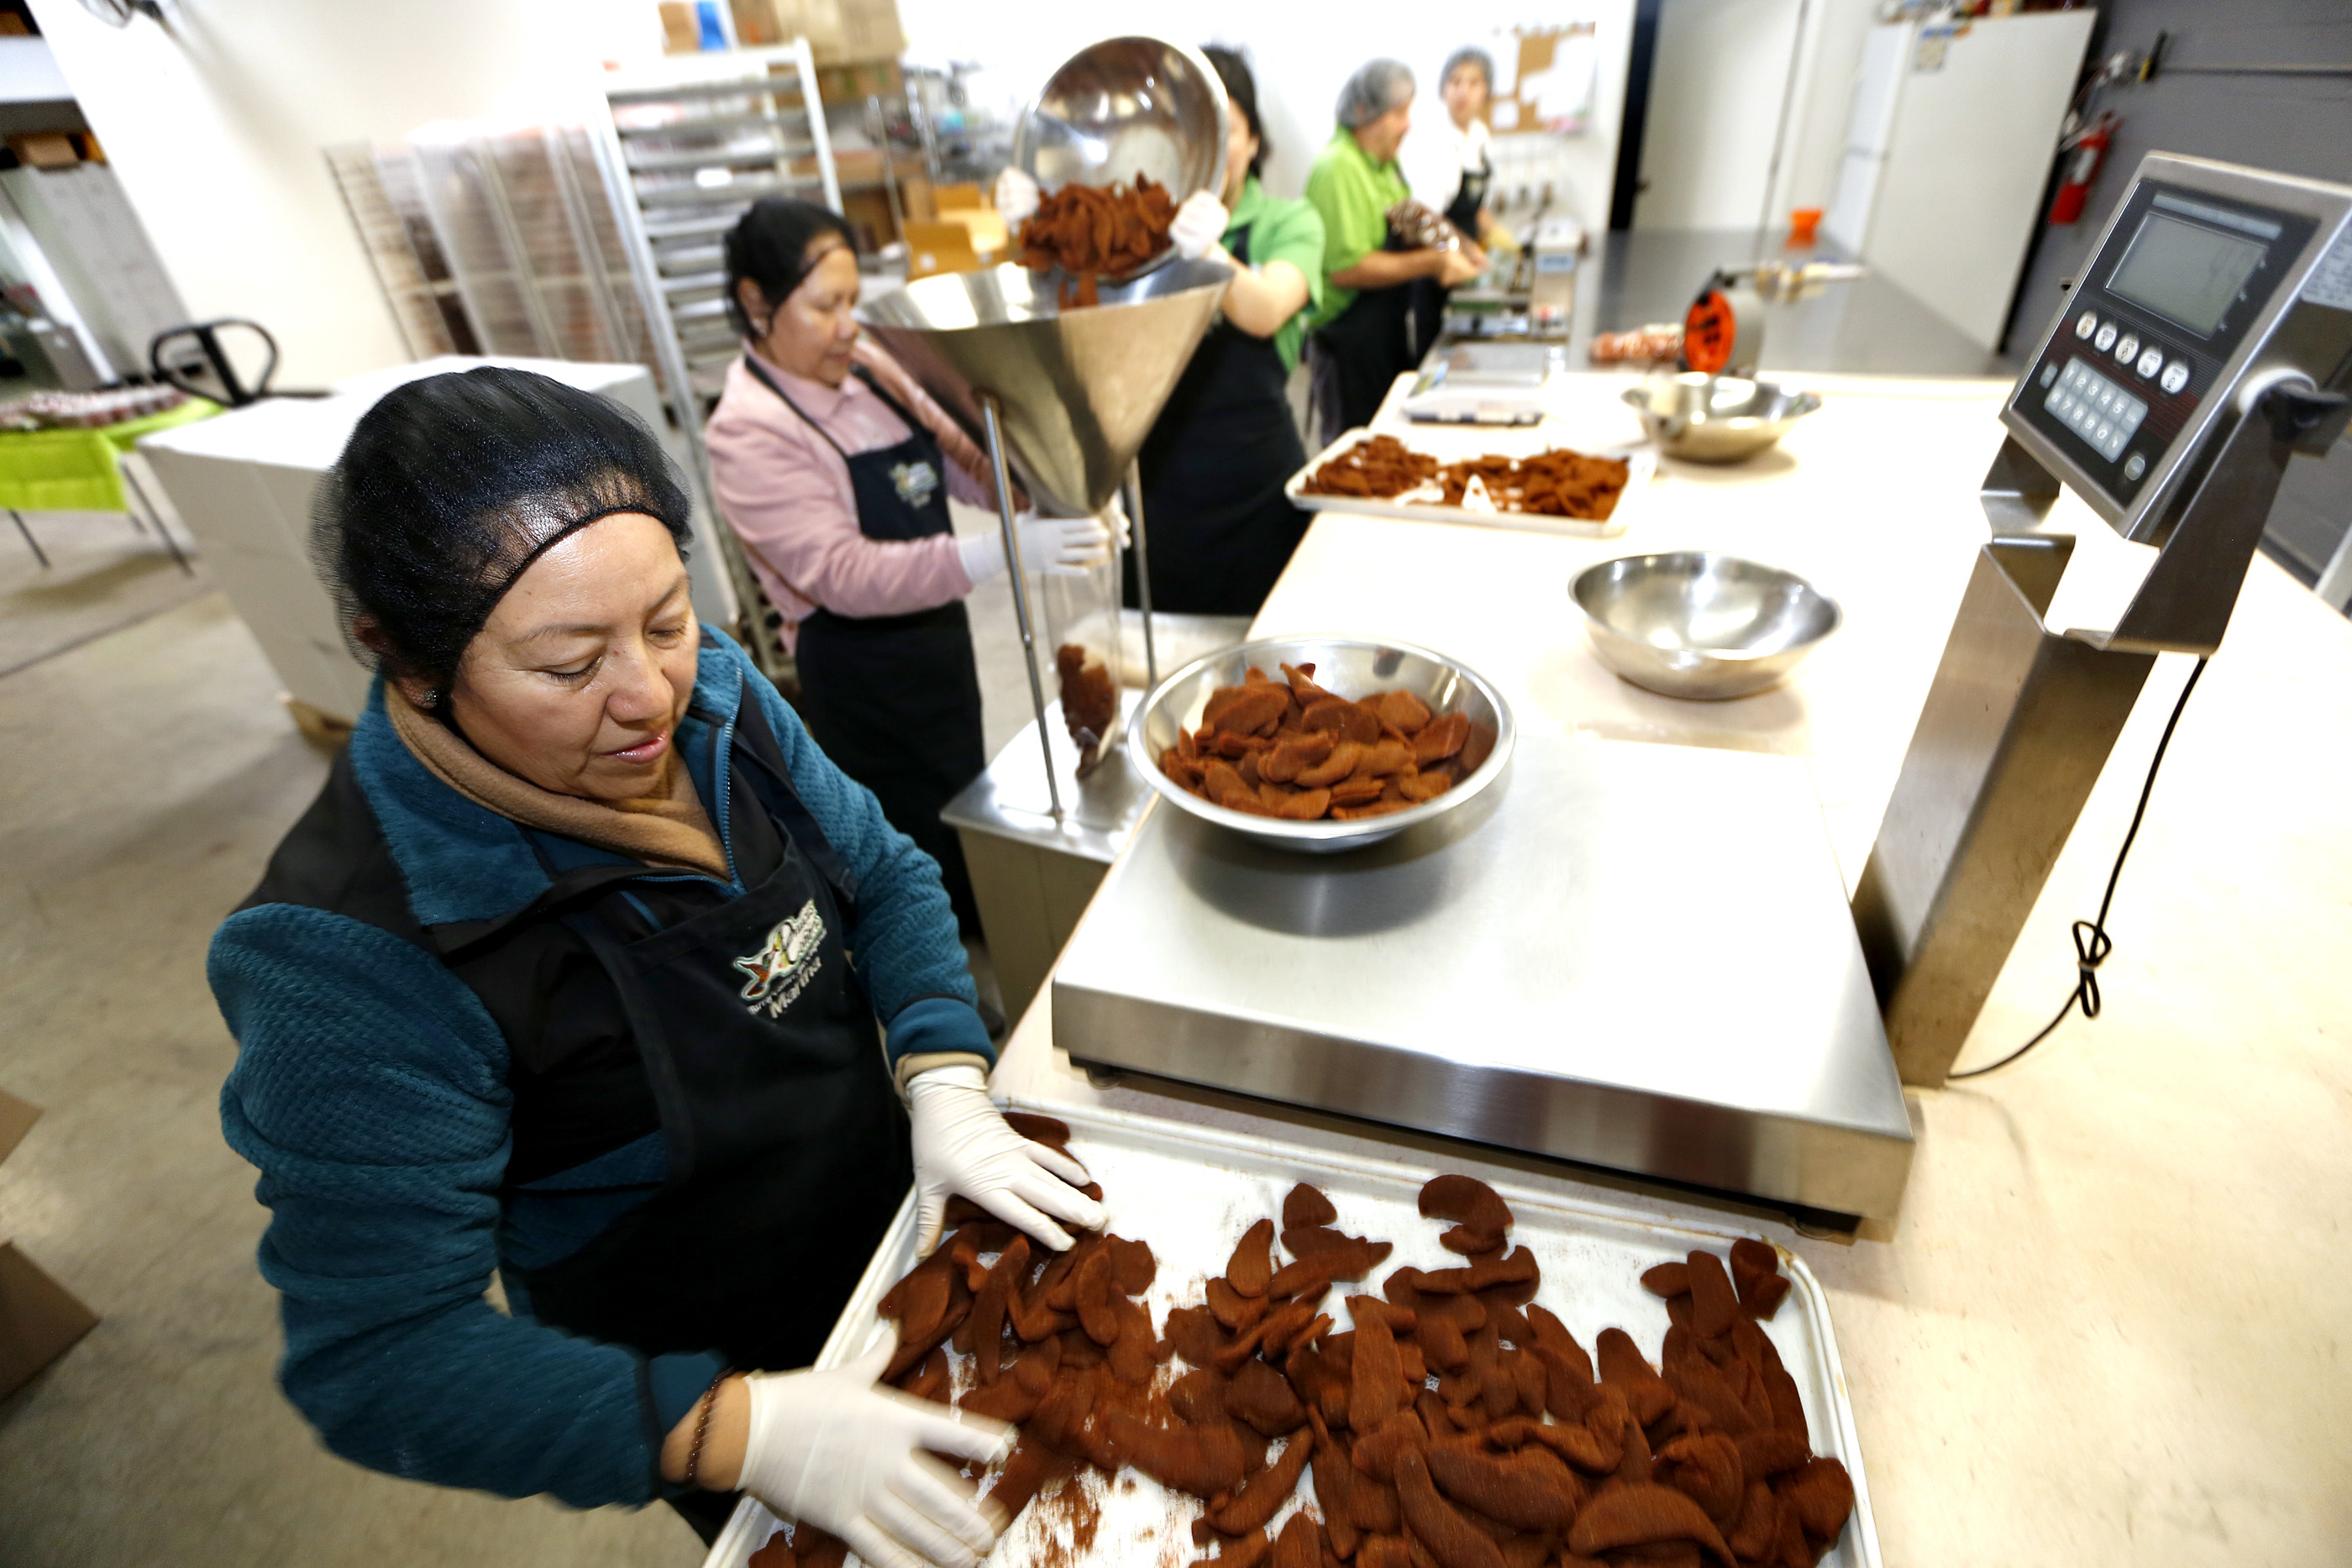 02/08/17/ LOS ANGELES/ Entrepreneur immigrant family, Ignacio Viramontes with his wife Martha, and children Ignacio Jr., 29, Yazmin, 23, and Uriel, 21, and sister in law, Silvia Perez package the popular candy, mango slices coated with chili, at their factory in Gardena. (Photo Aurelia Ventura/ La Opinion)